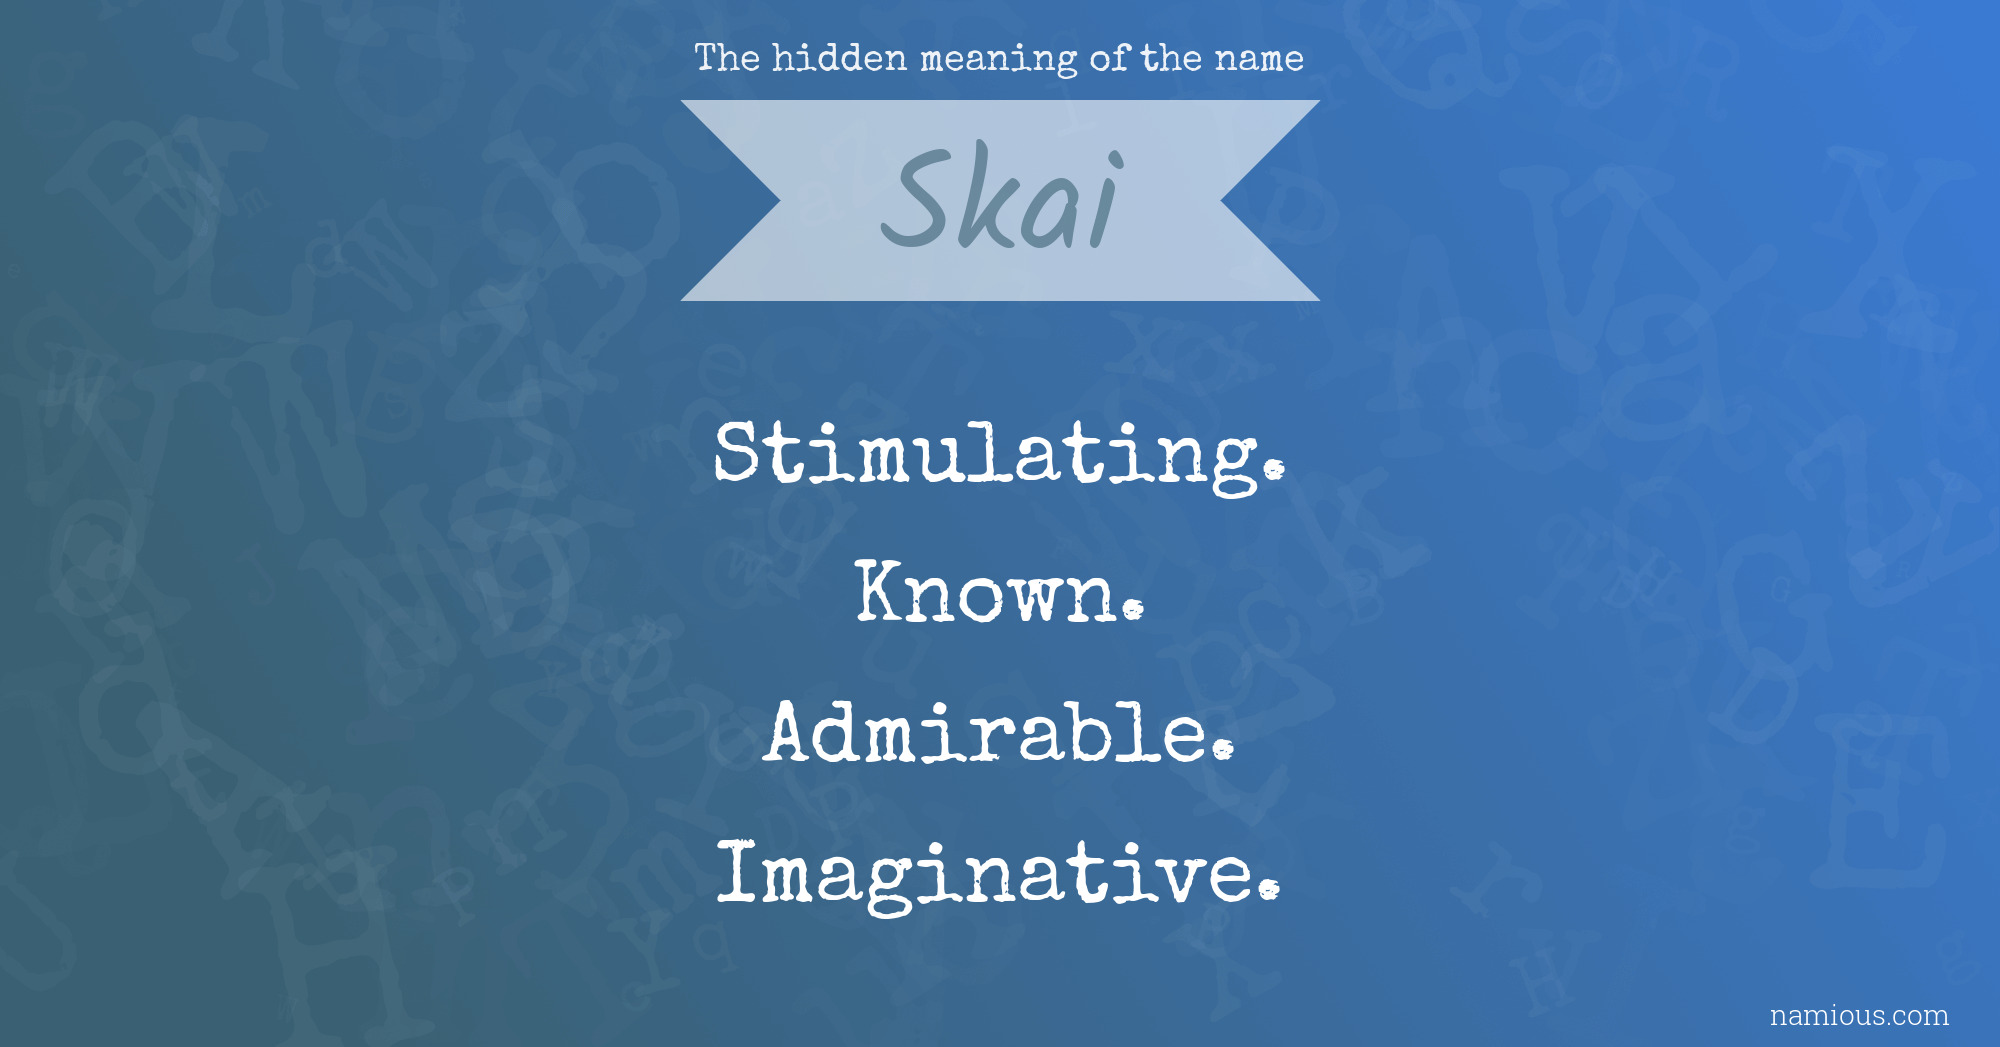 The hidden meaning of the name Skai